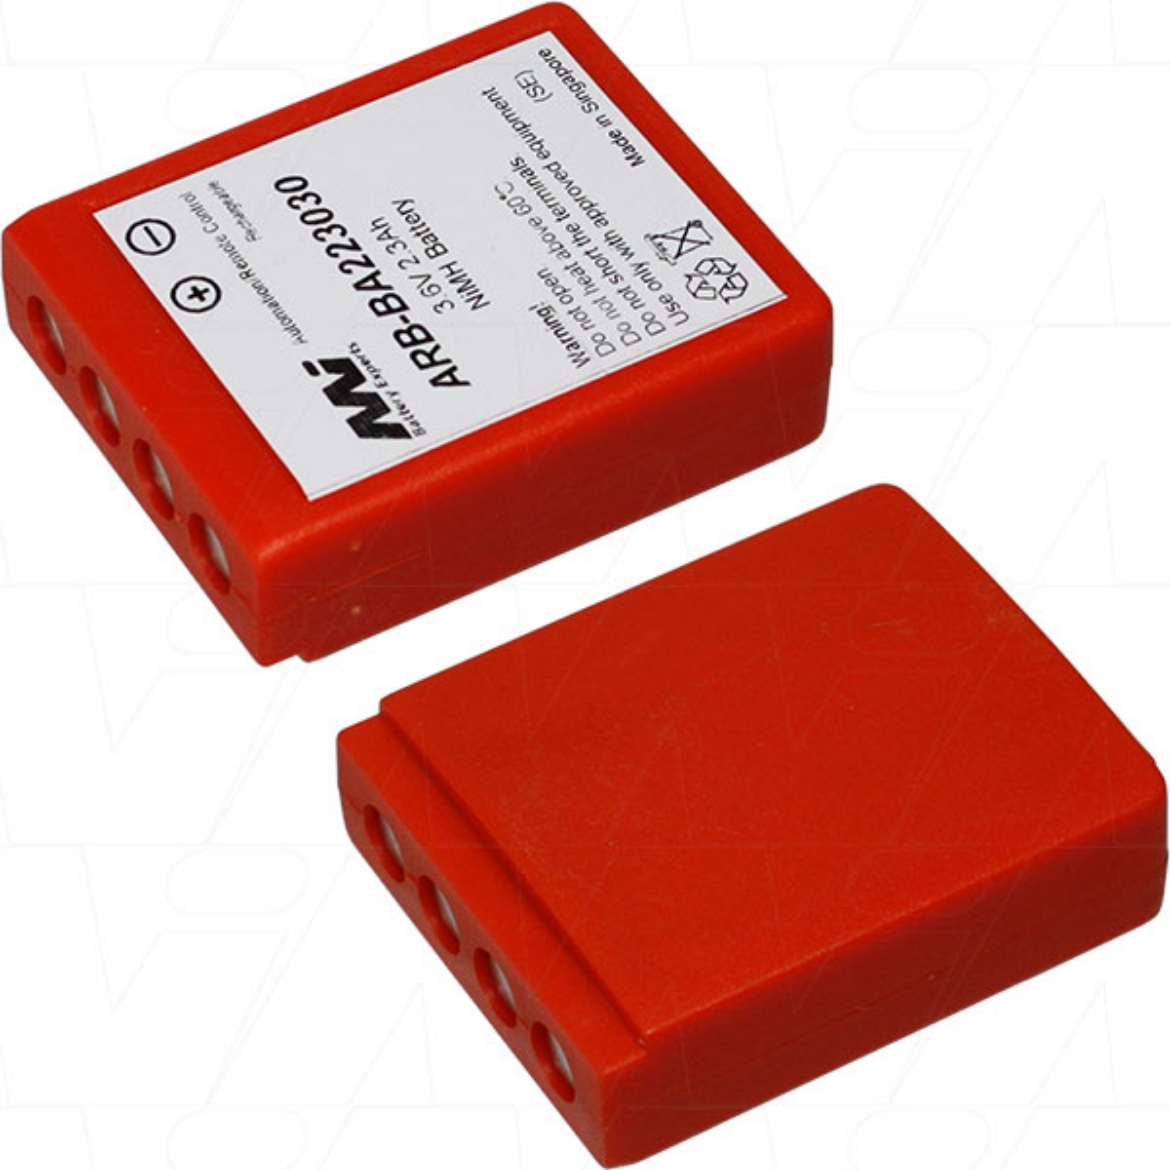 Picture of ARB-BA223030 CRANE REMOTE BATTERY - 3.6V 2.3AH